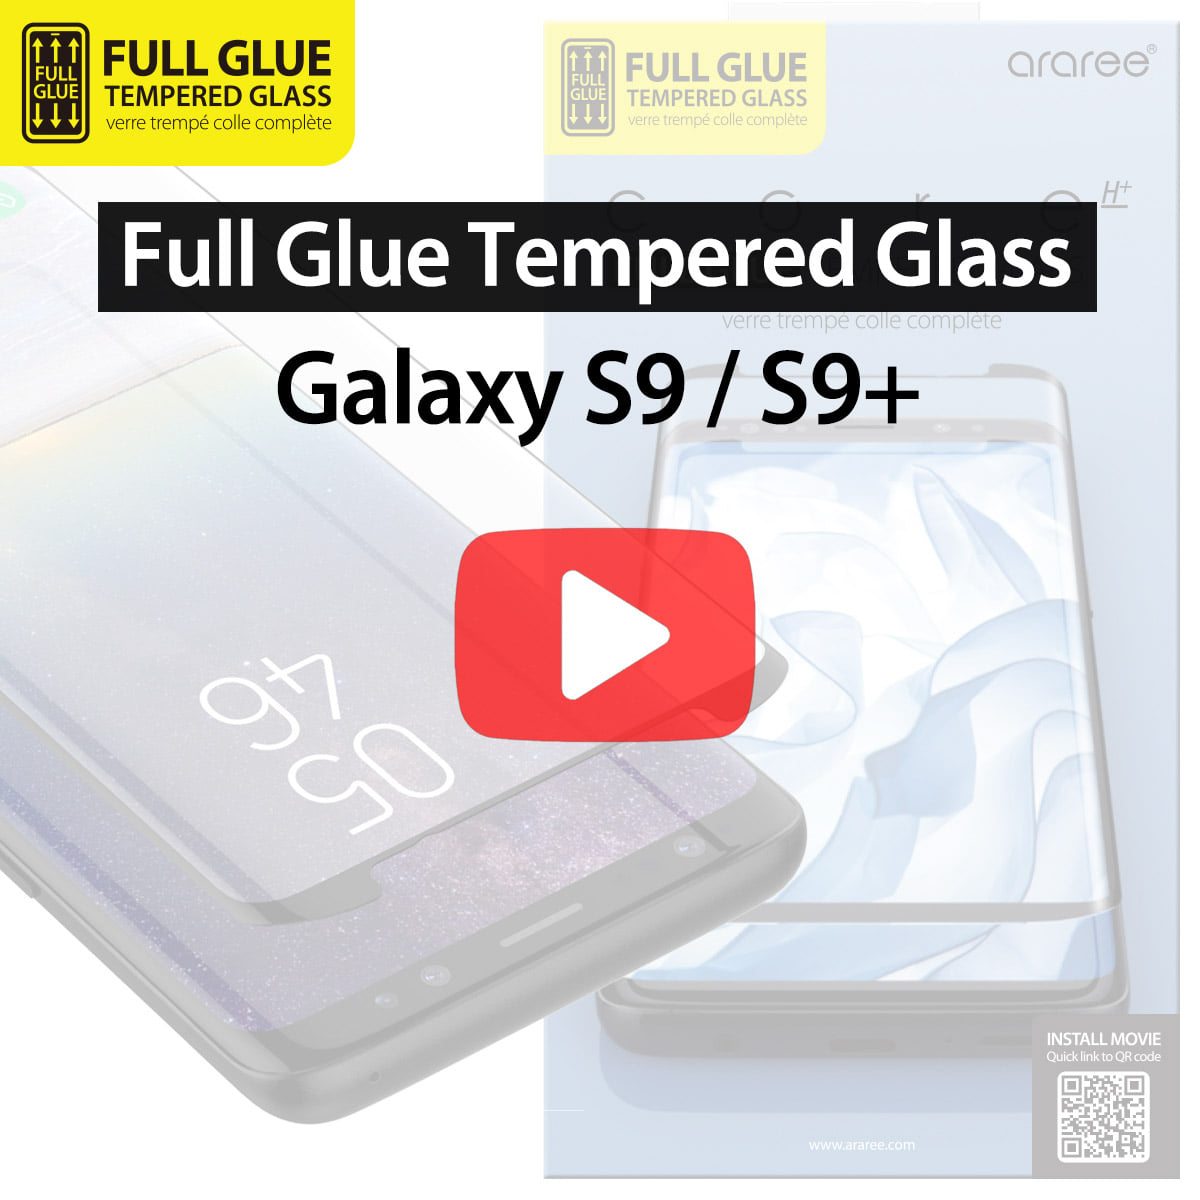 S9/S9+ core FullGlue Tempered Glass Screen Protector Install Guide